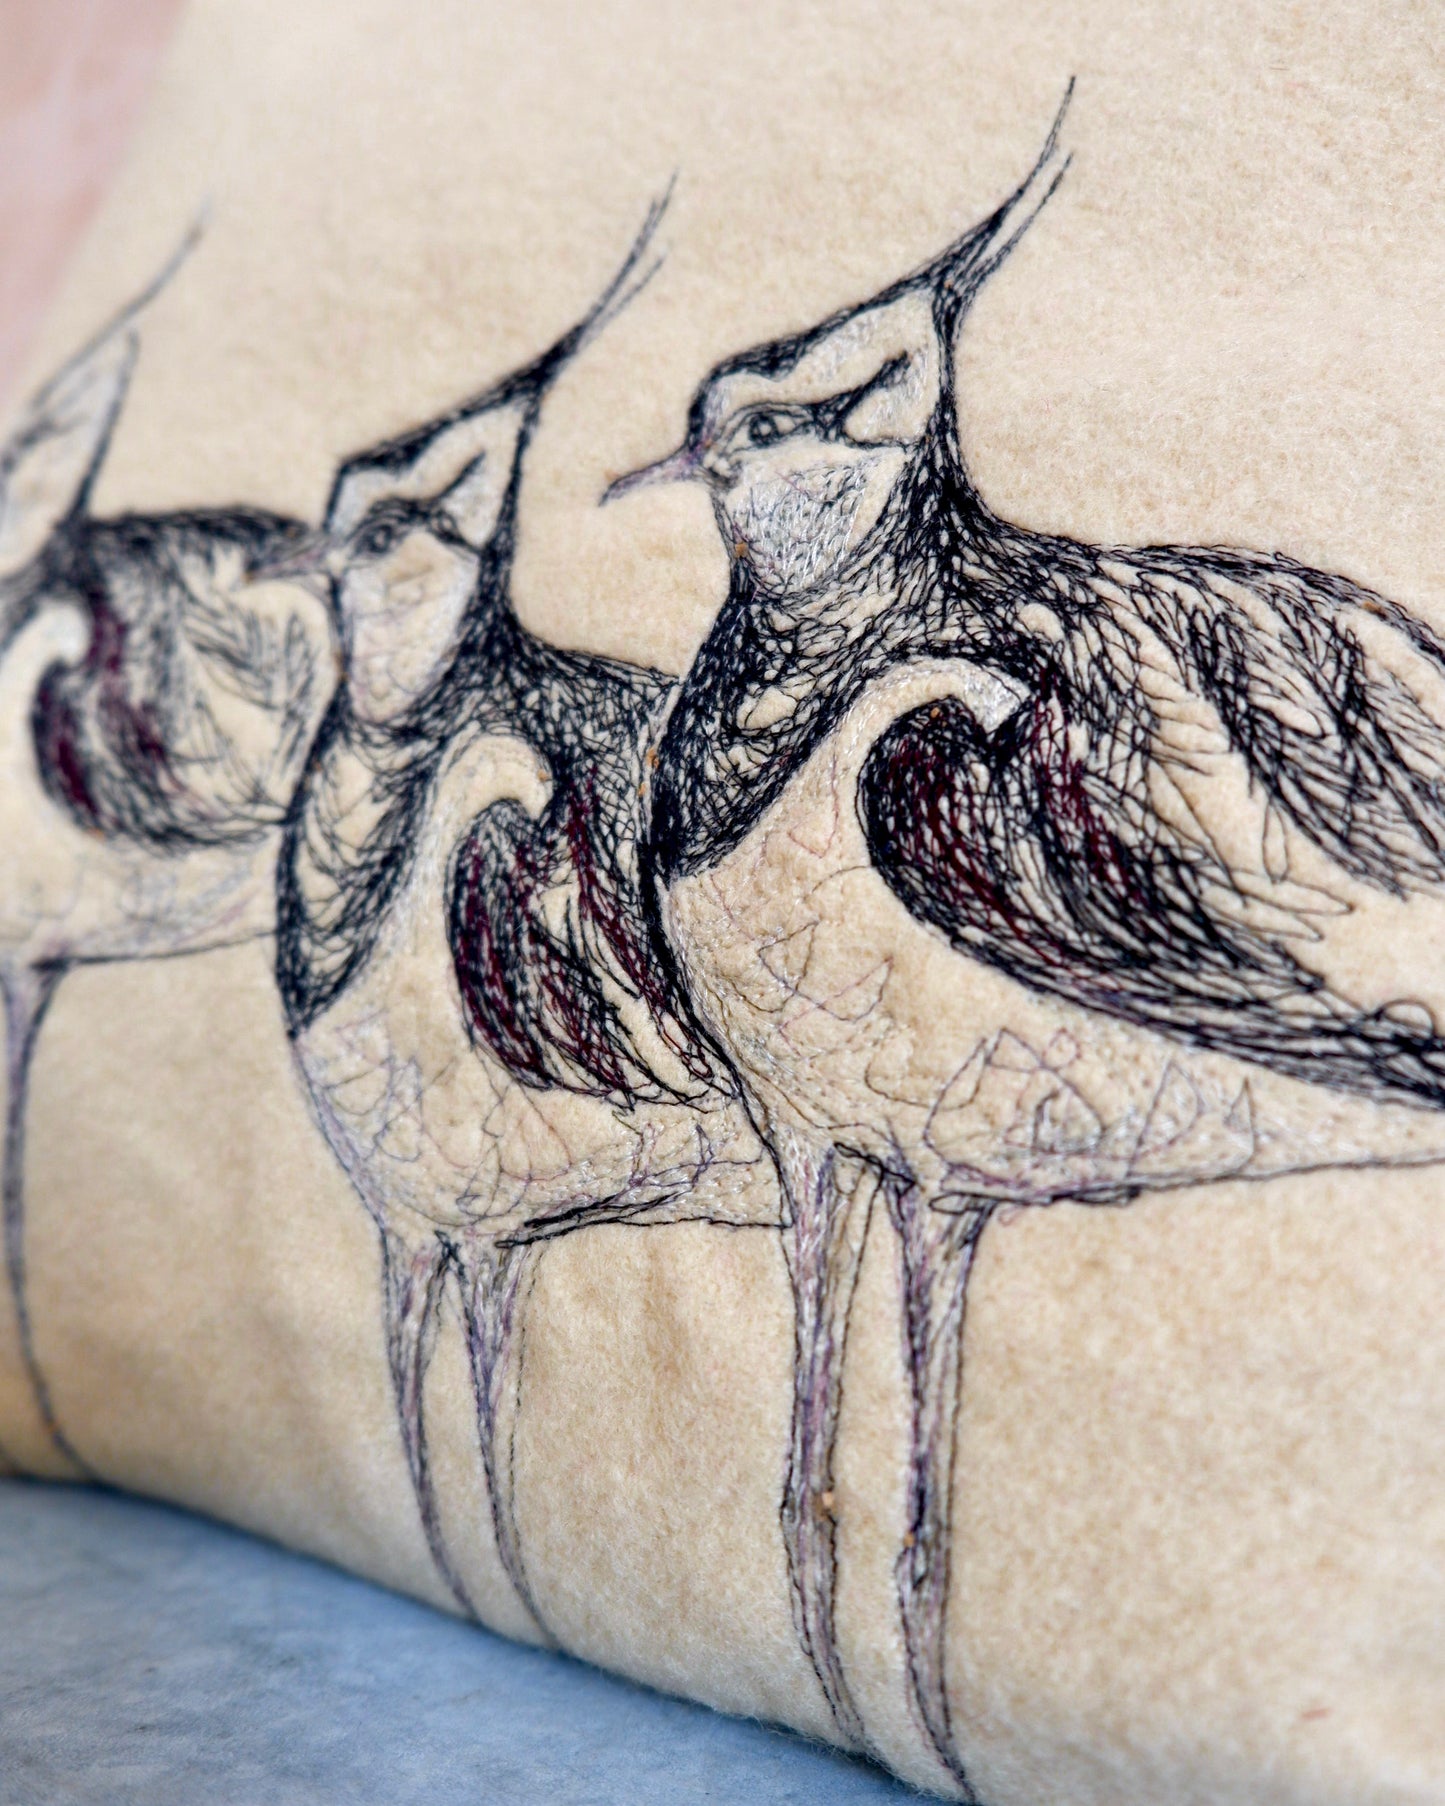 anna osbourne the speculating rook textiles embroidery screen print homeware Lapwing Cushion